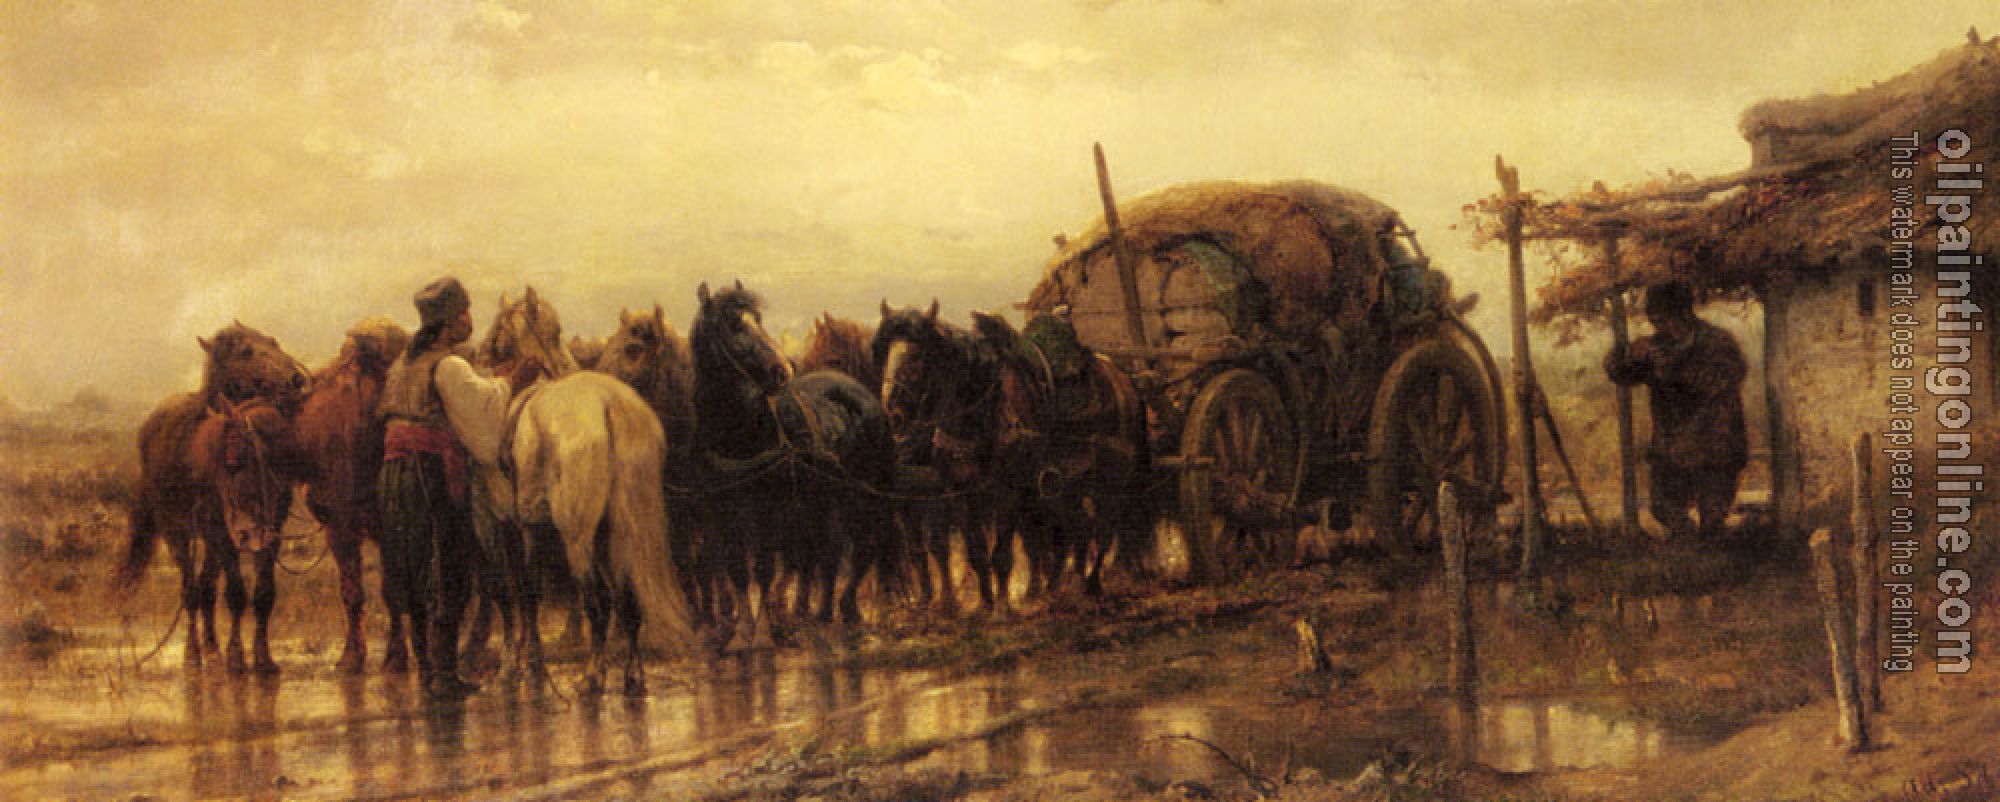 Adolf Schreyer - Hitching Horses To The Wagon